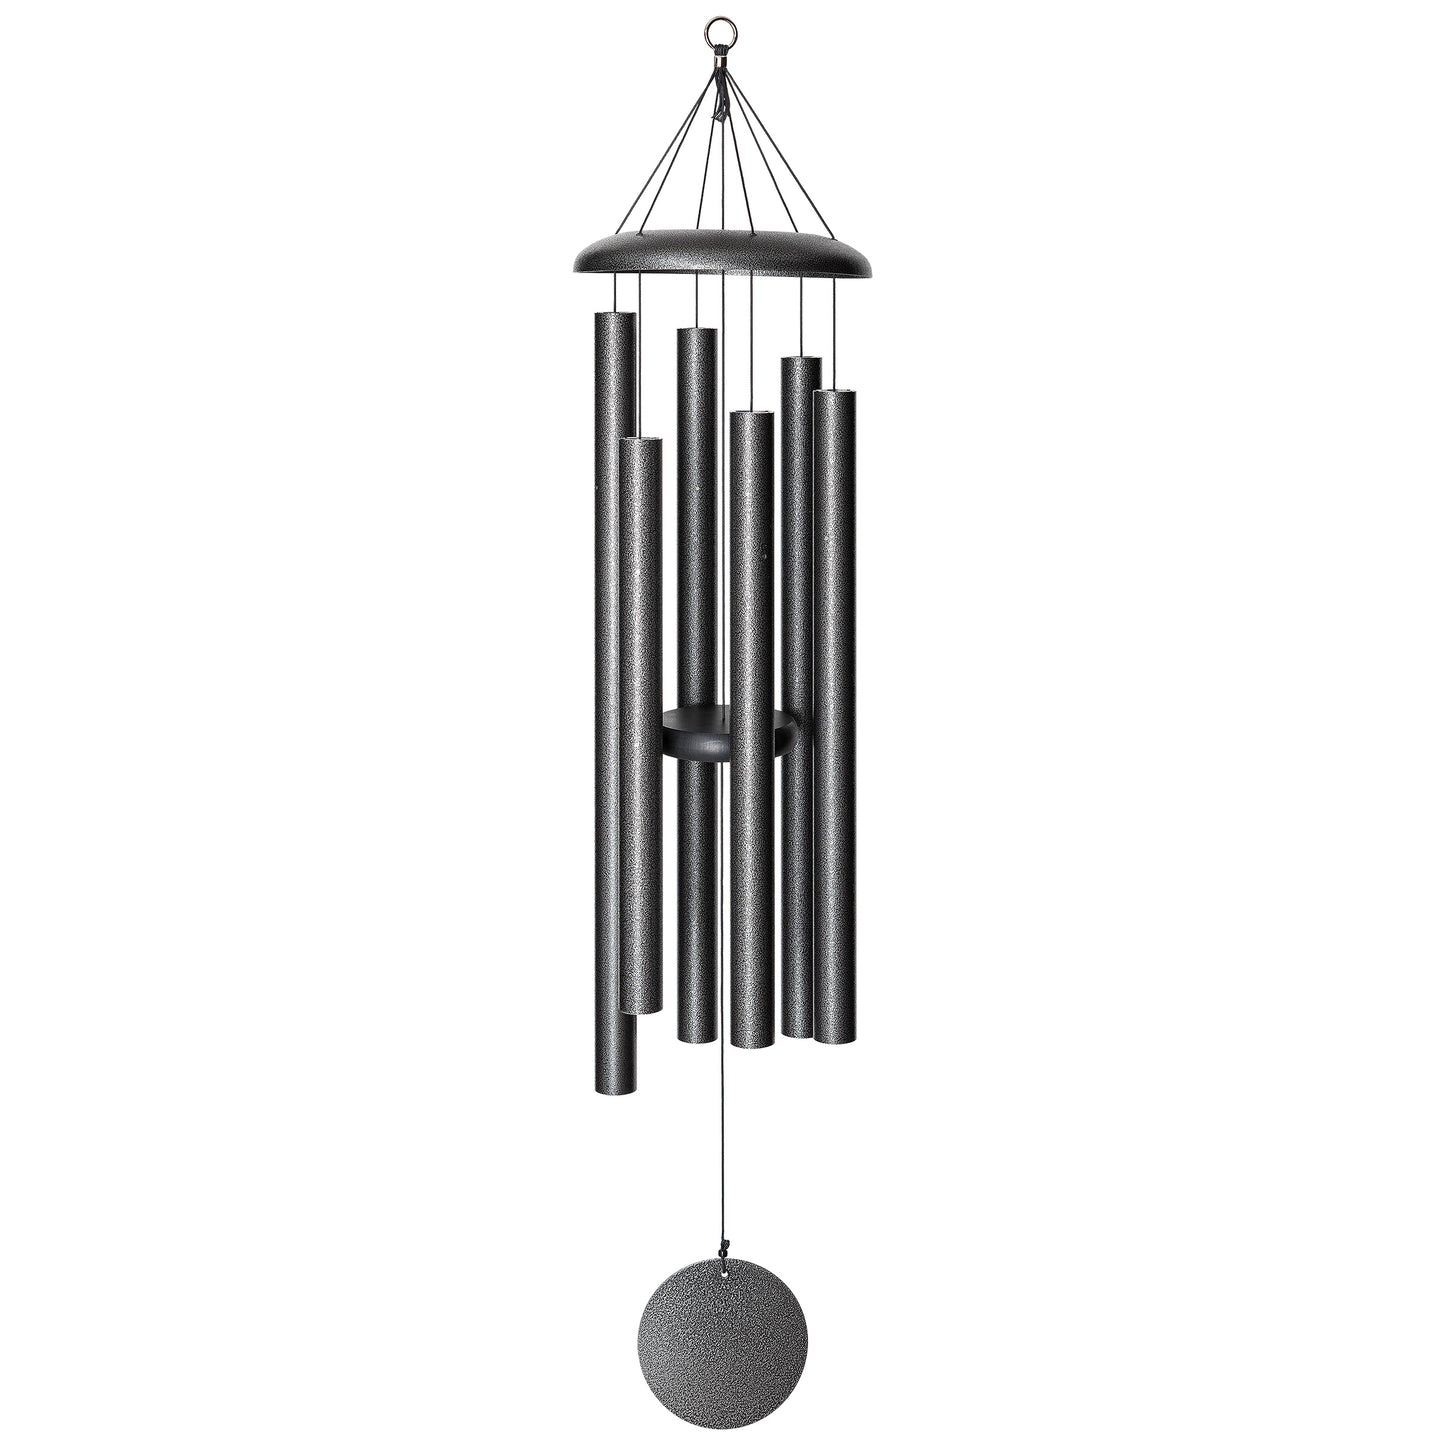 These Silver Vein Wind River Corinthian Bells wind chimes from Home and Garden Treasures are crafted with six hollow tubes of varying sizes suspended from a central ring, creating enchanting melodies as they dance in the breeze. Complete with a stylish round metal sail that catches gentle winds, each Corinthian Bell exemplifies timeless elegance and superior craftsmanship. Elevate your garden retreat with the perfect gift today!